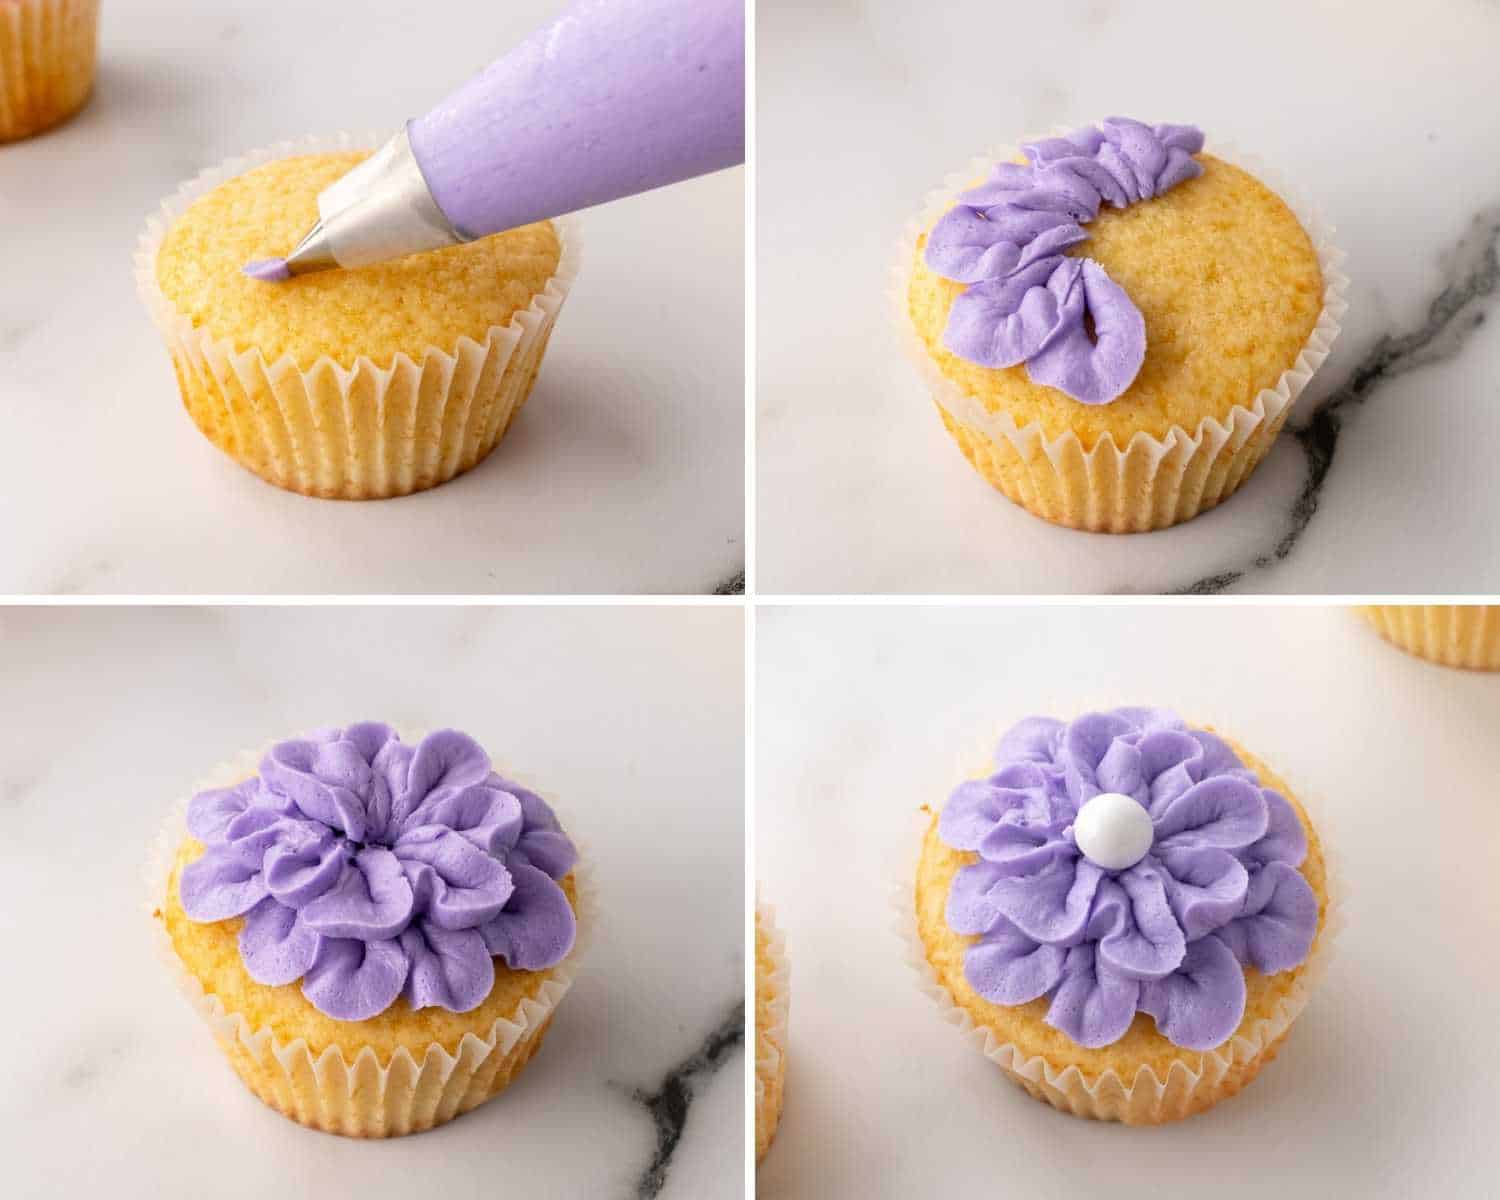 How to pipe to a fluffy flower on a cupcake